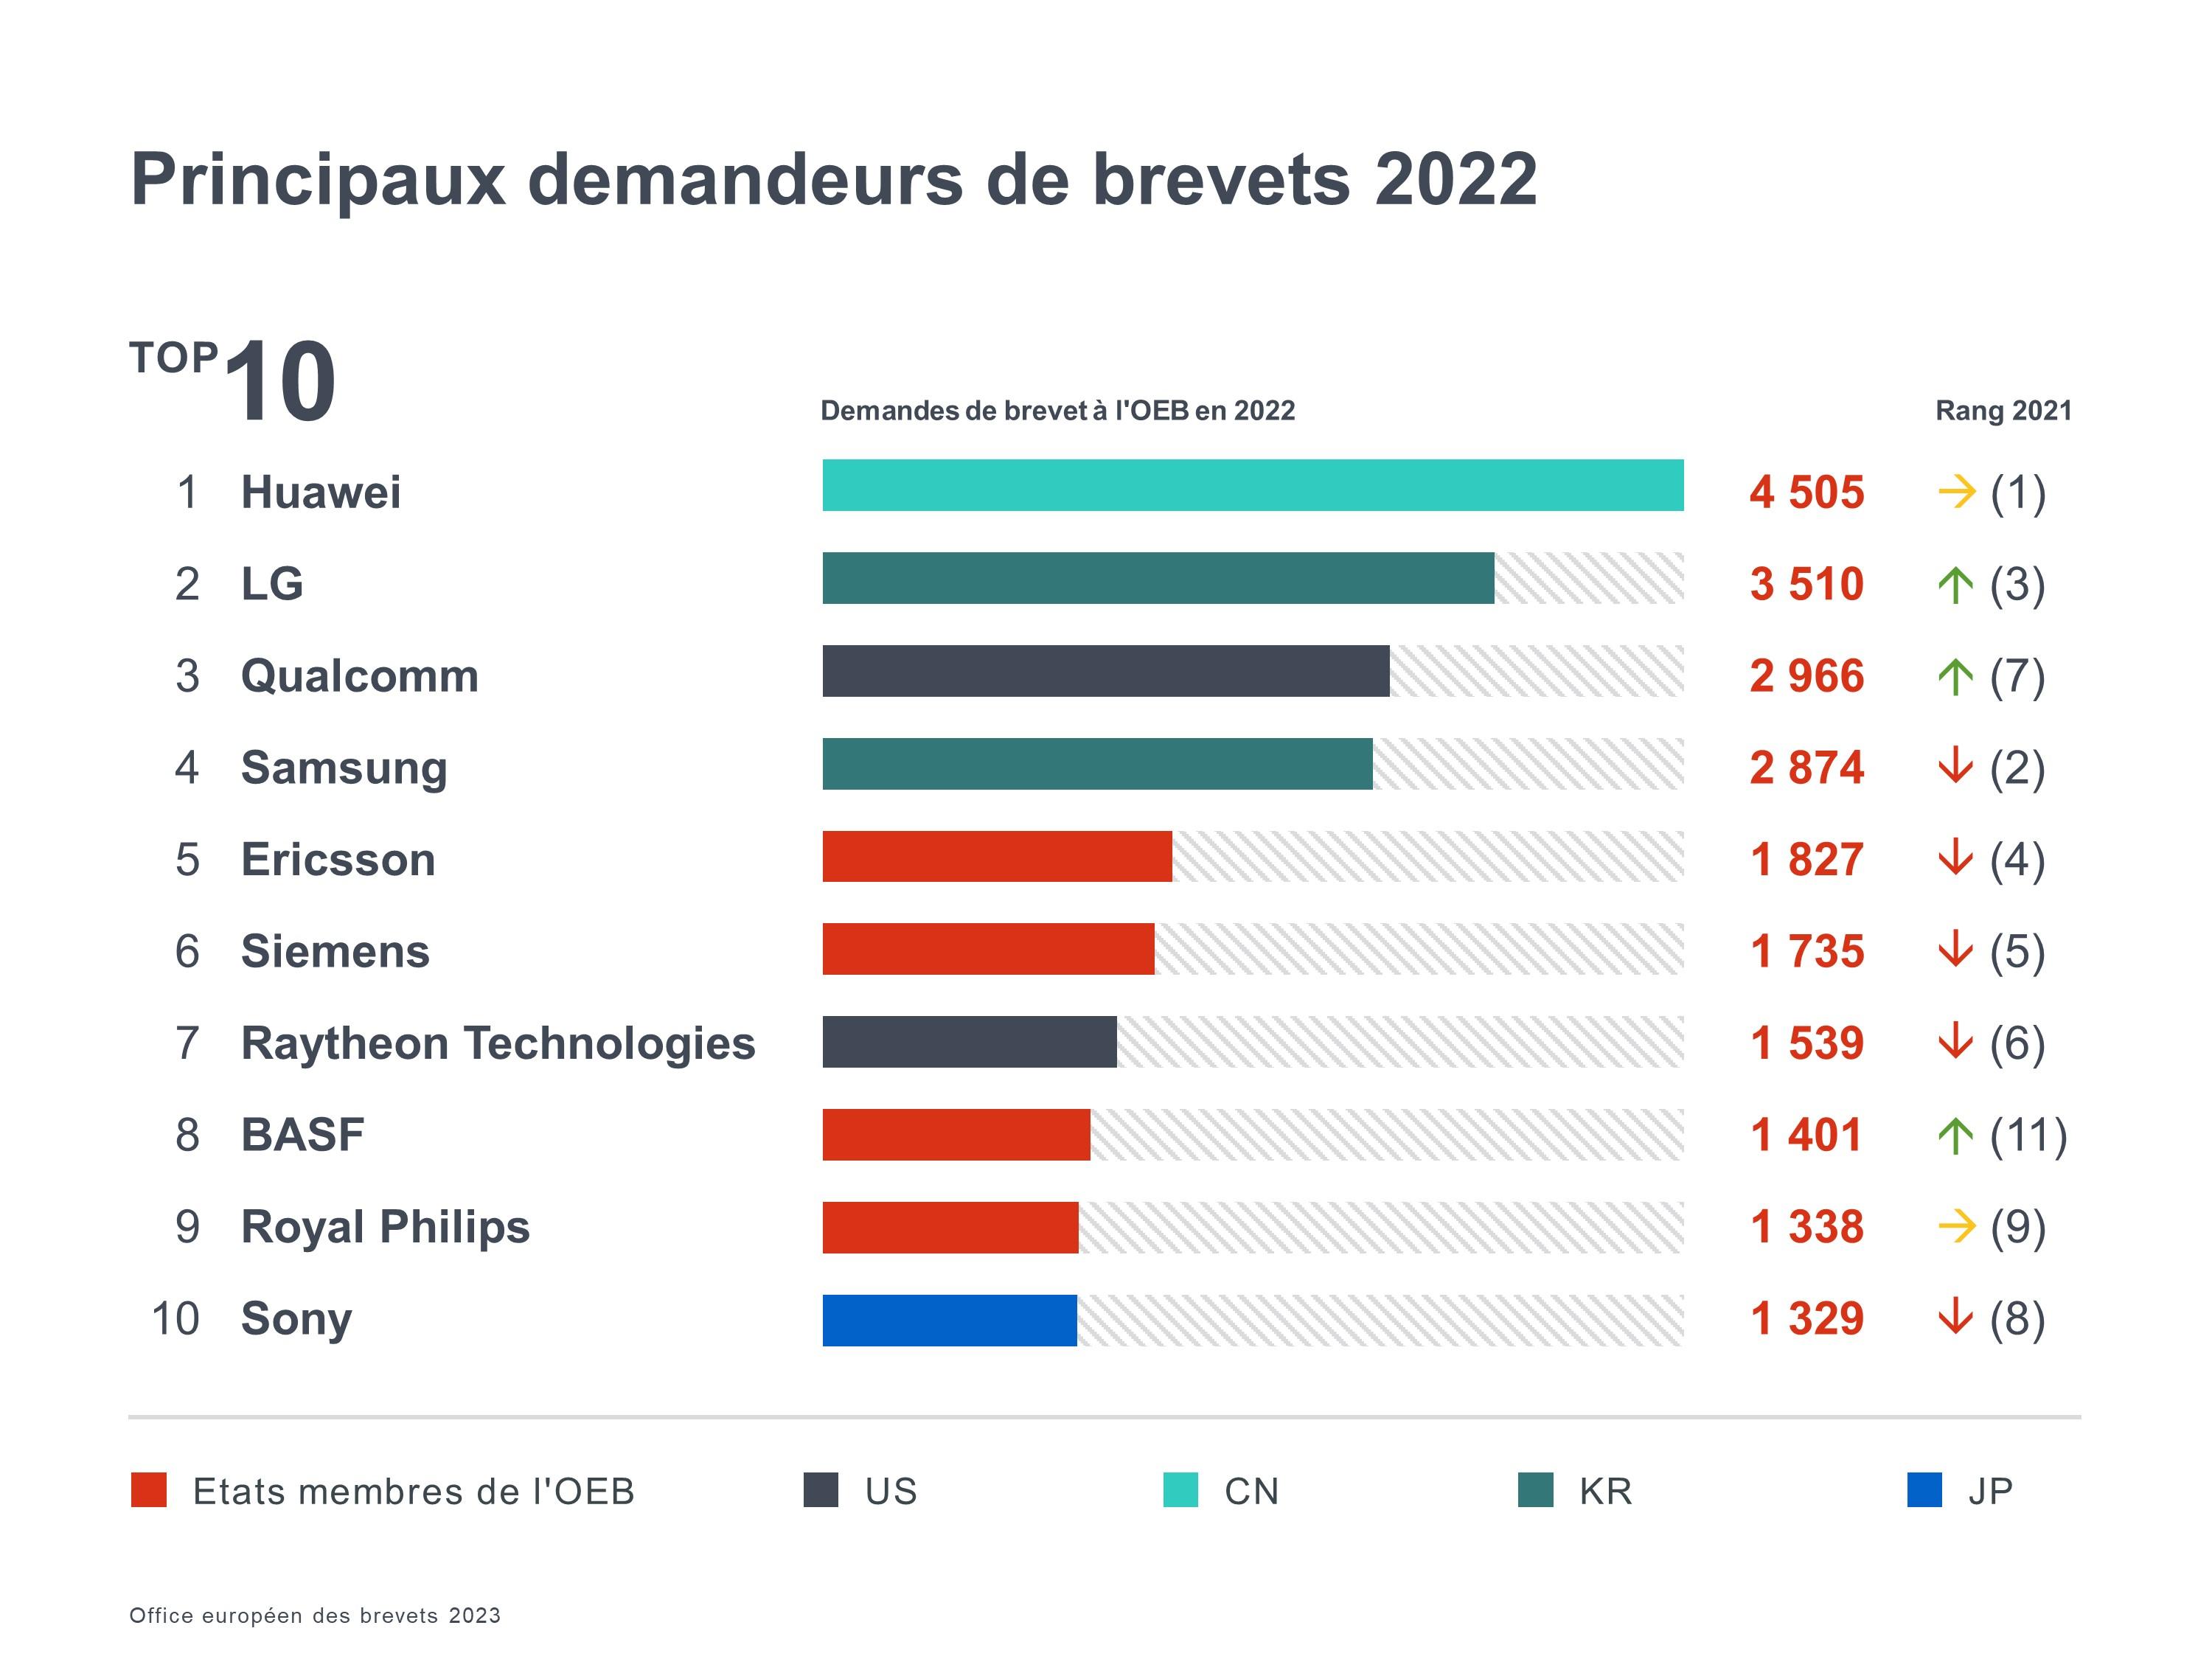 Top ten applicants 2022. First place Huawei with 4505 applications in 2022.